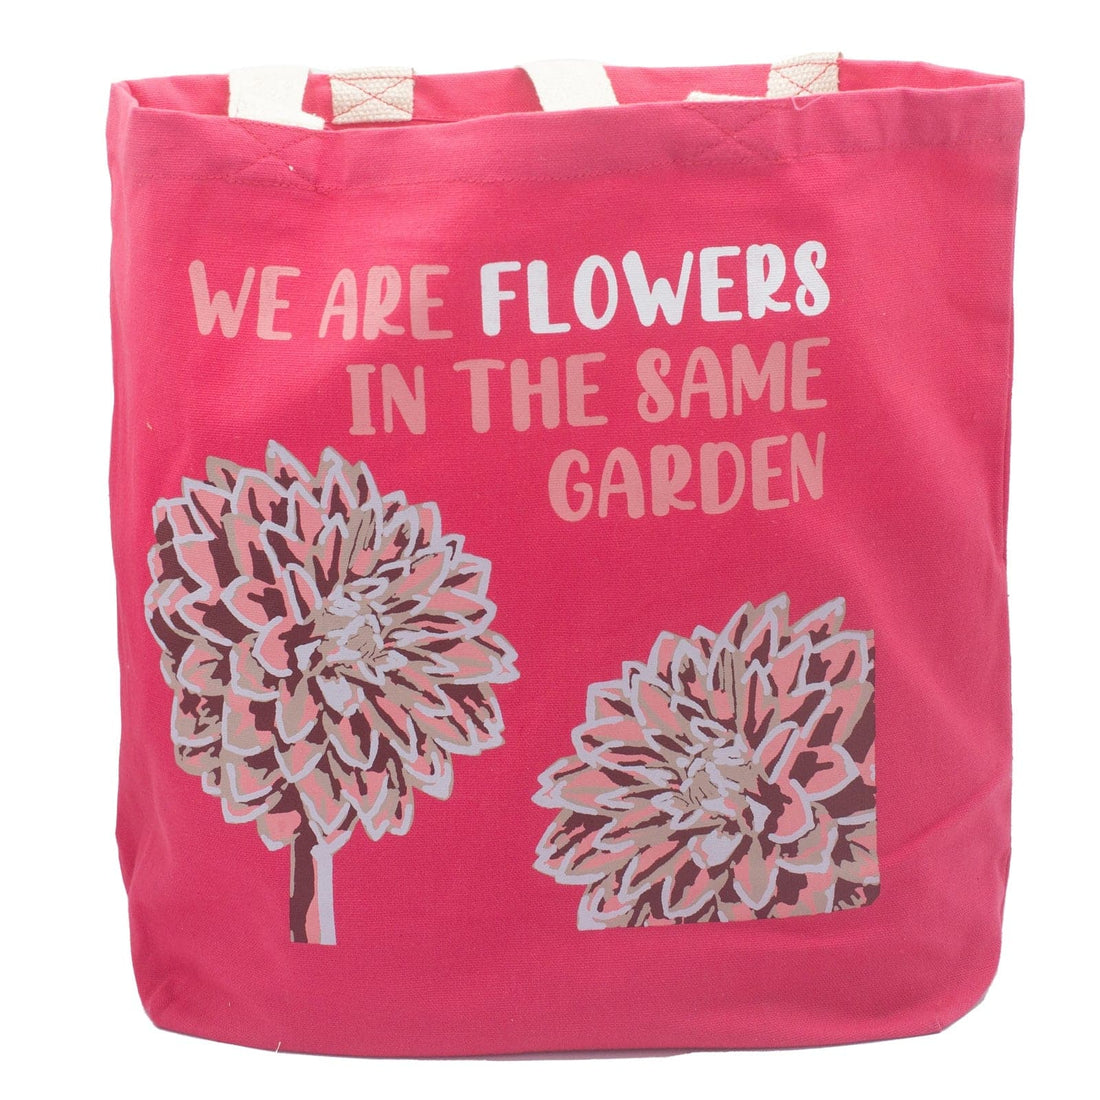 Printed Cotton Bag - We are Flowers - Pink - best price from Maltashopper.com PCB-03B